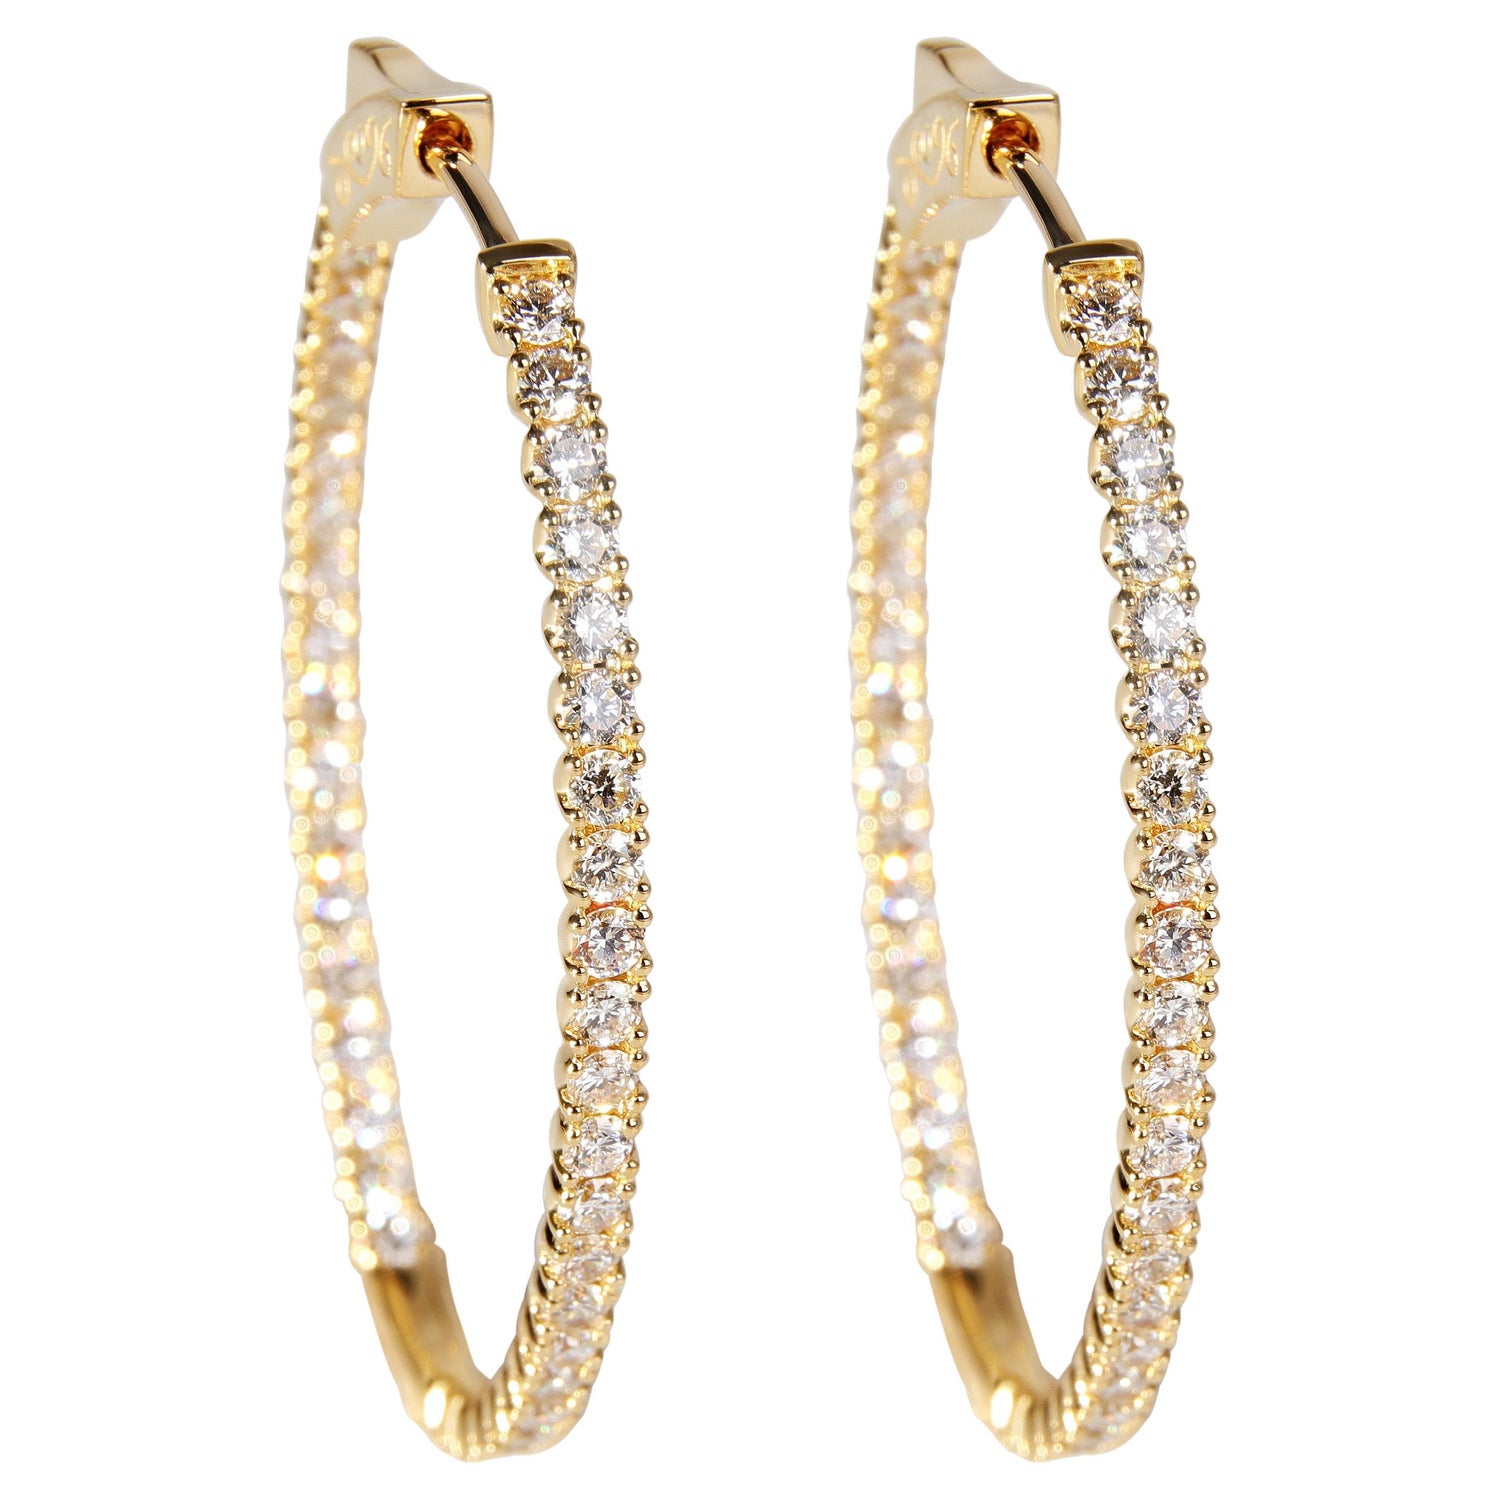 LOUIS VUITTON® Idylle Blossom Hoops, Pink Gold And Diamonds